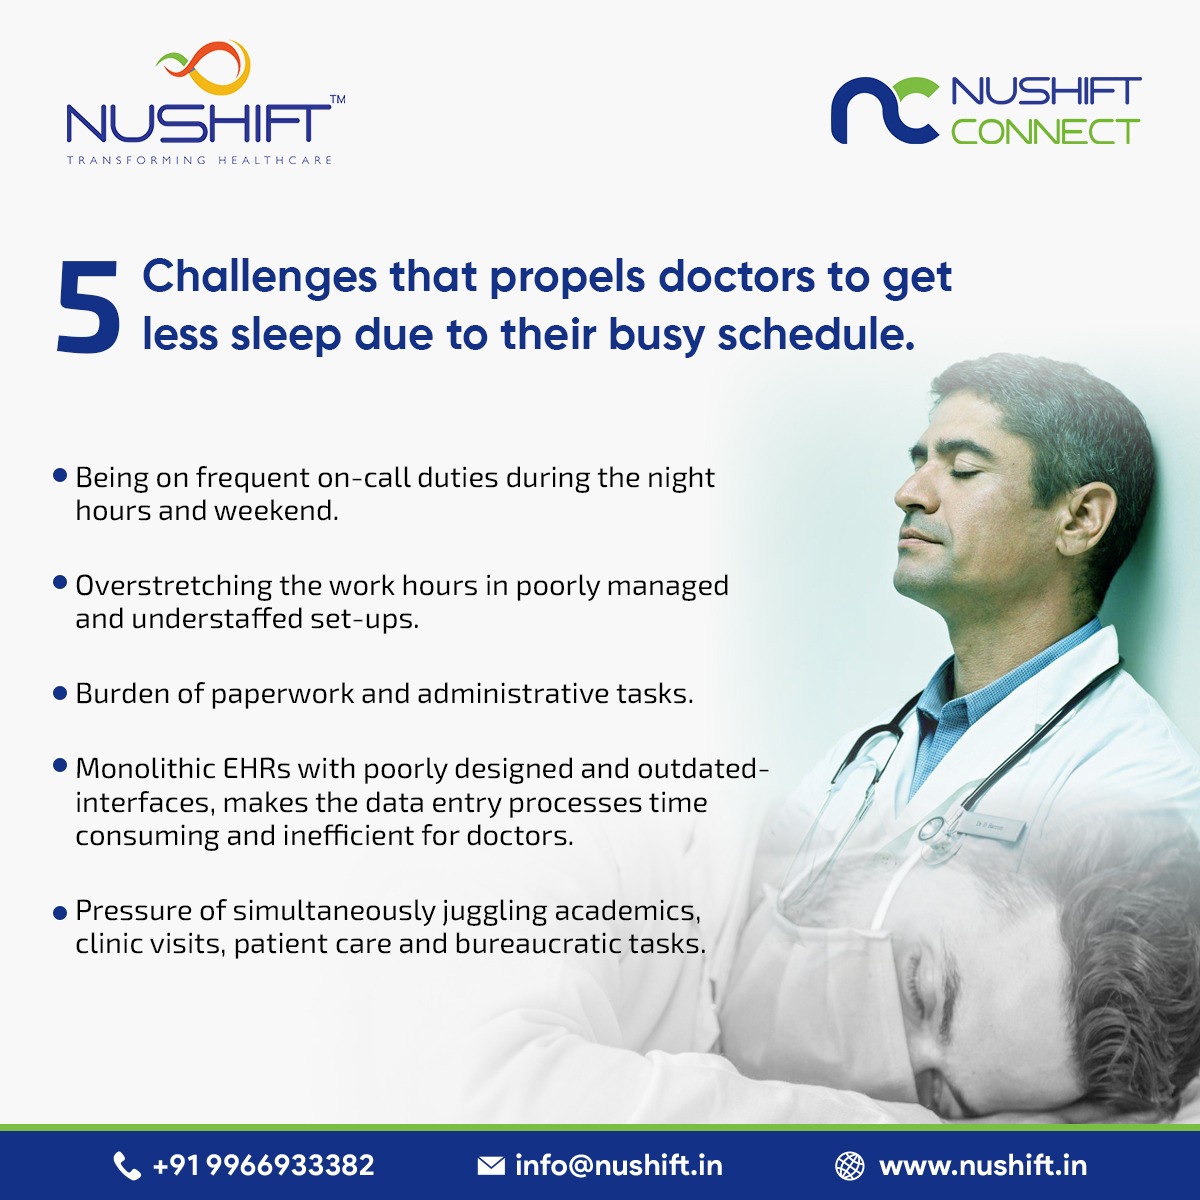 5 Challenges that propels doctors to get less sleep due to their busy schedule. #doctorslife #doctorslifestyle #doctorshealth #doctors #doctor #physicianlife #healthcare #medicalfraternity #physicians #socialnetwork #socialnetworking #MBBS #healthcareprofessionals  #doctorsadvice